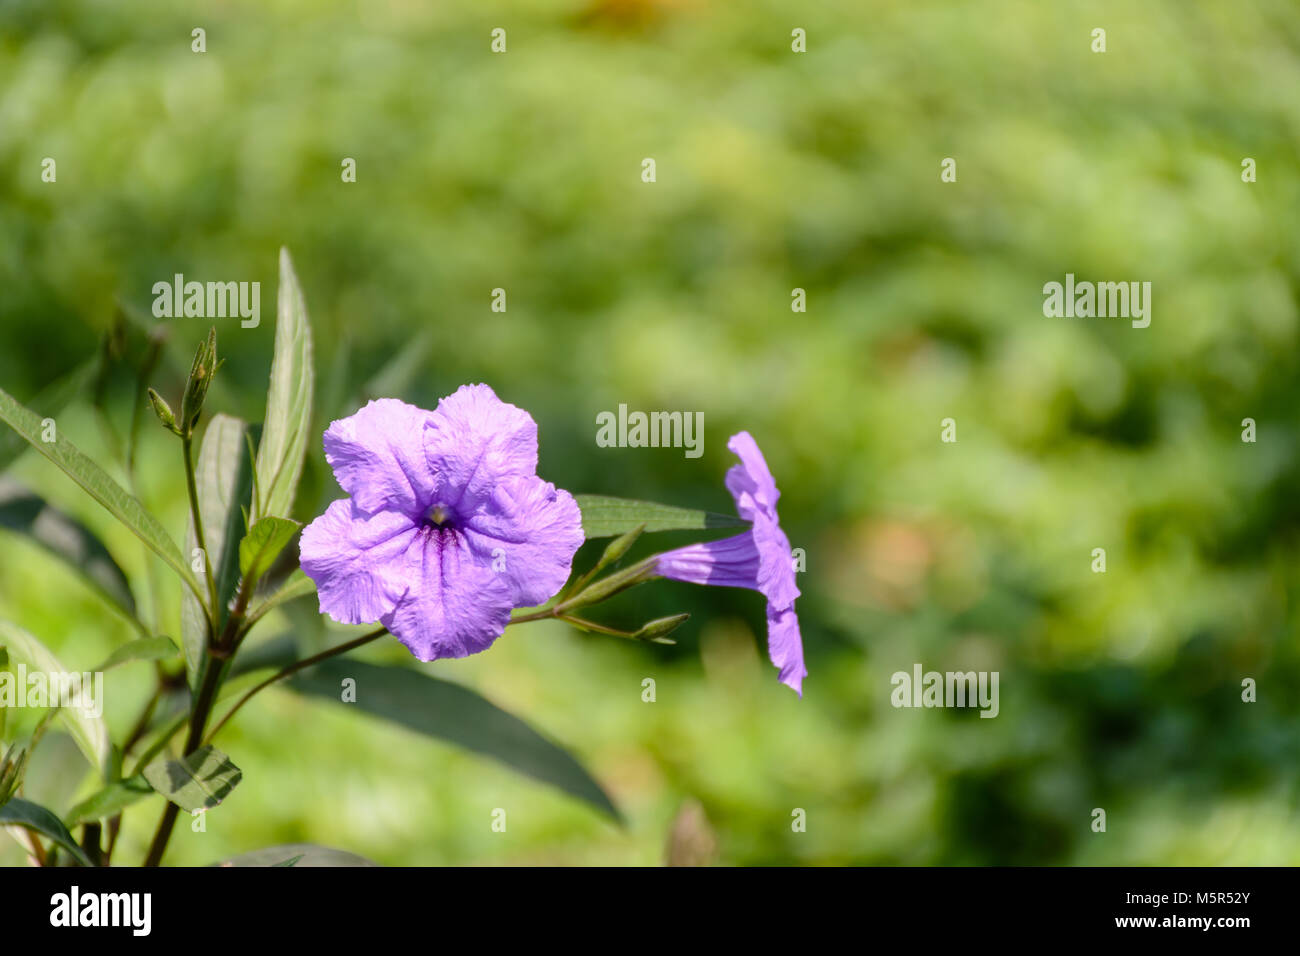 photo of ruellia flowers with blur background Stock Photo